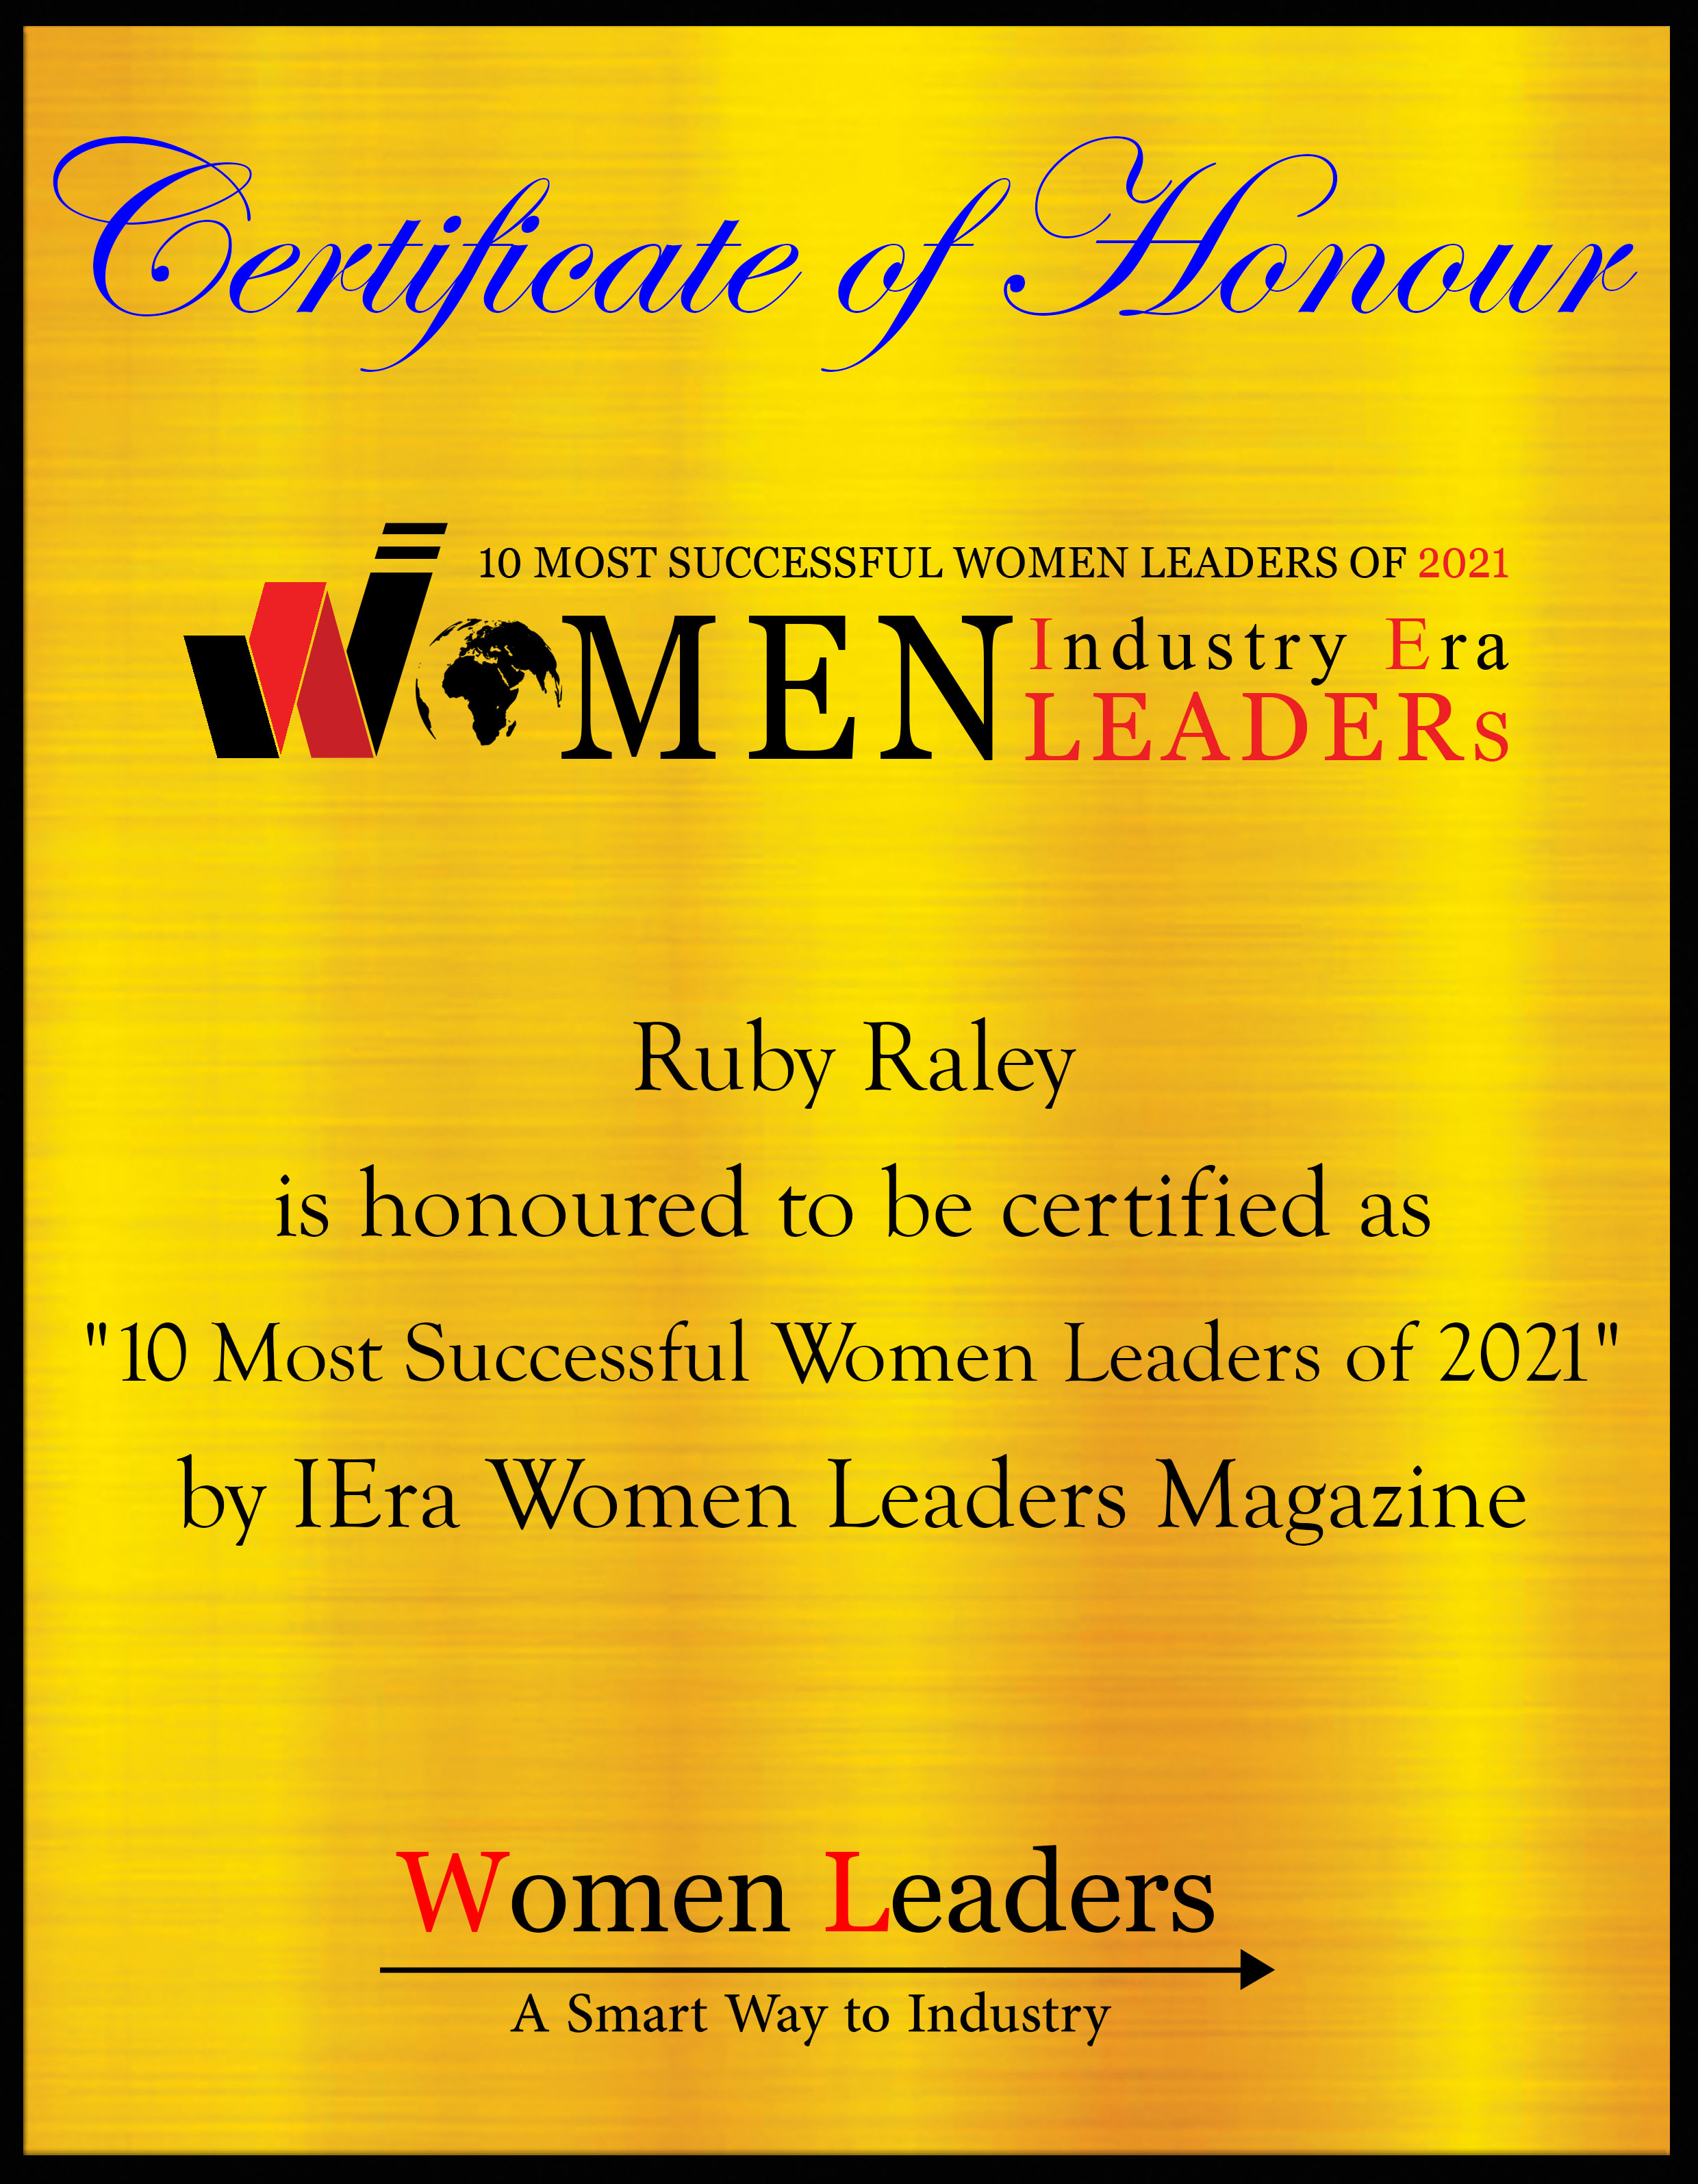 Ruby Raley, VP Sales, Healthcare and Life Sciences of Axway, Most Successful Women Leaders of 2021